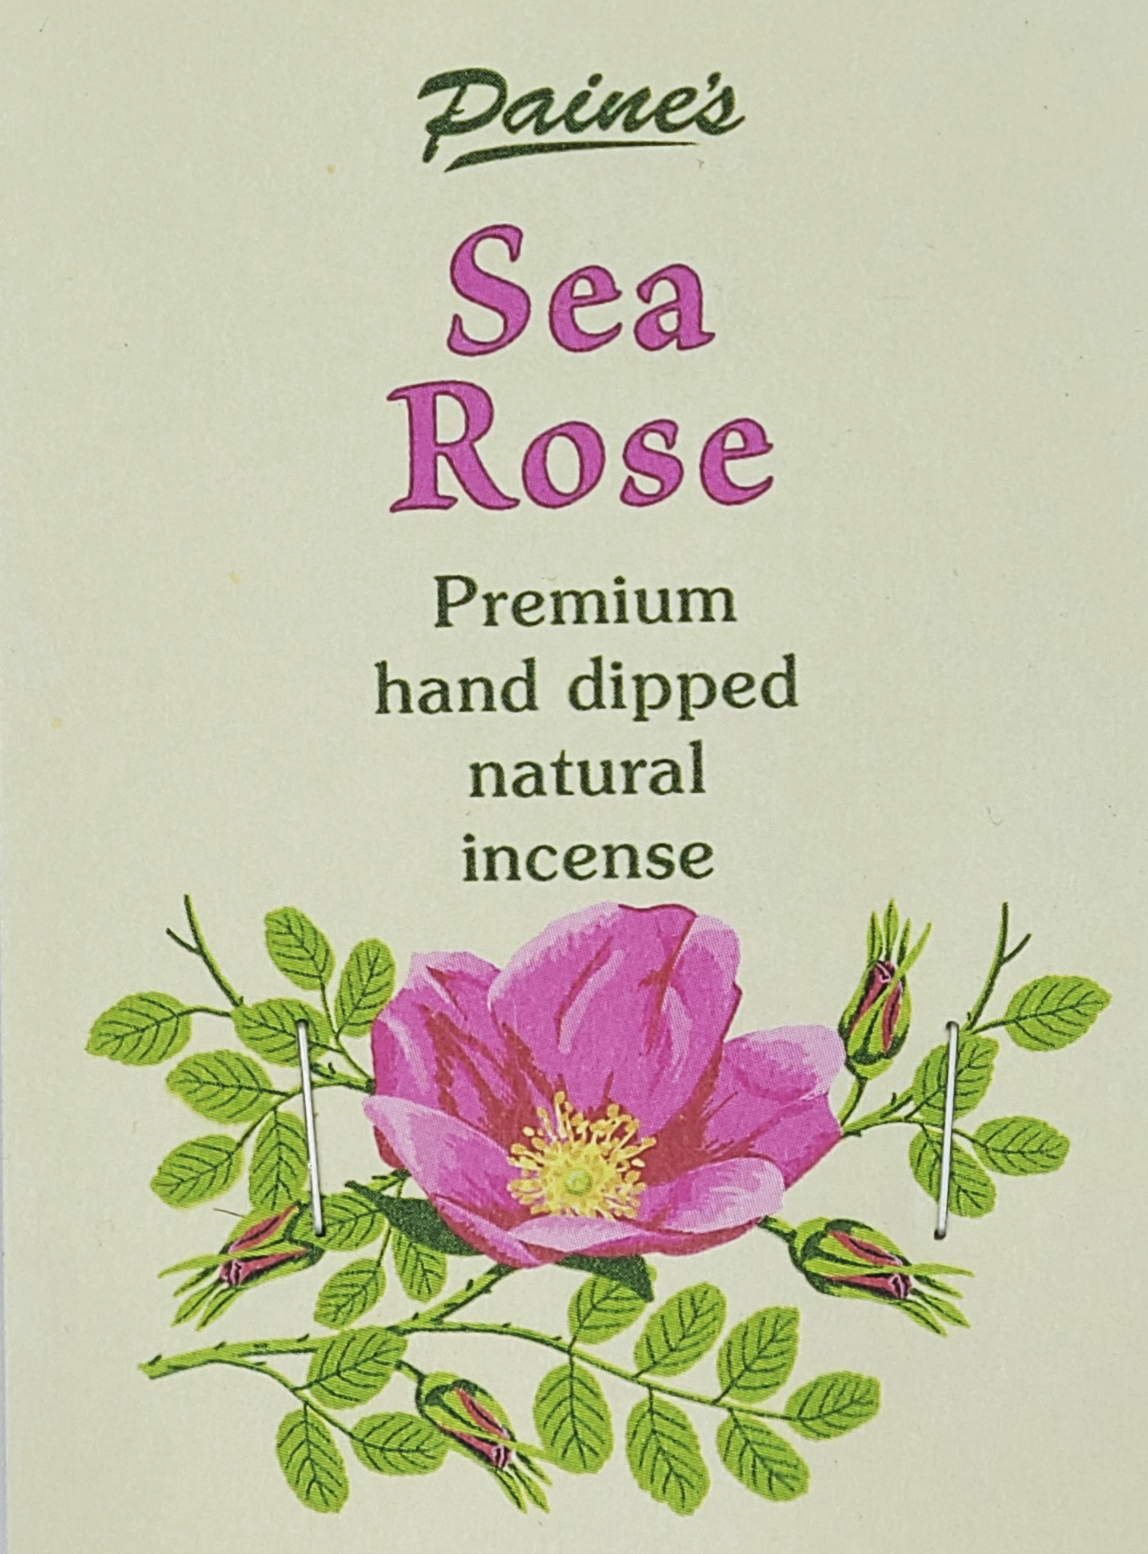 20 Sea Rose Scented Long Stick Incense